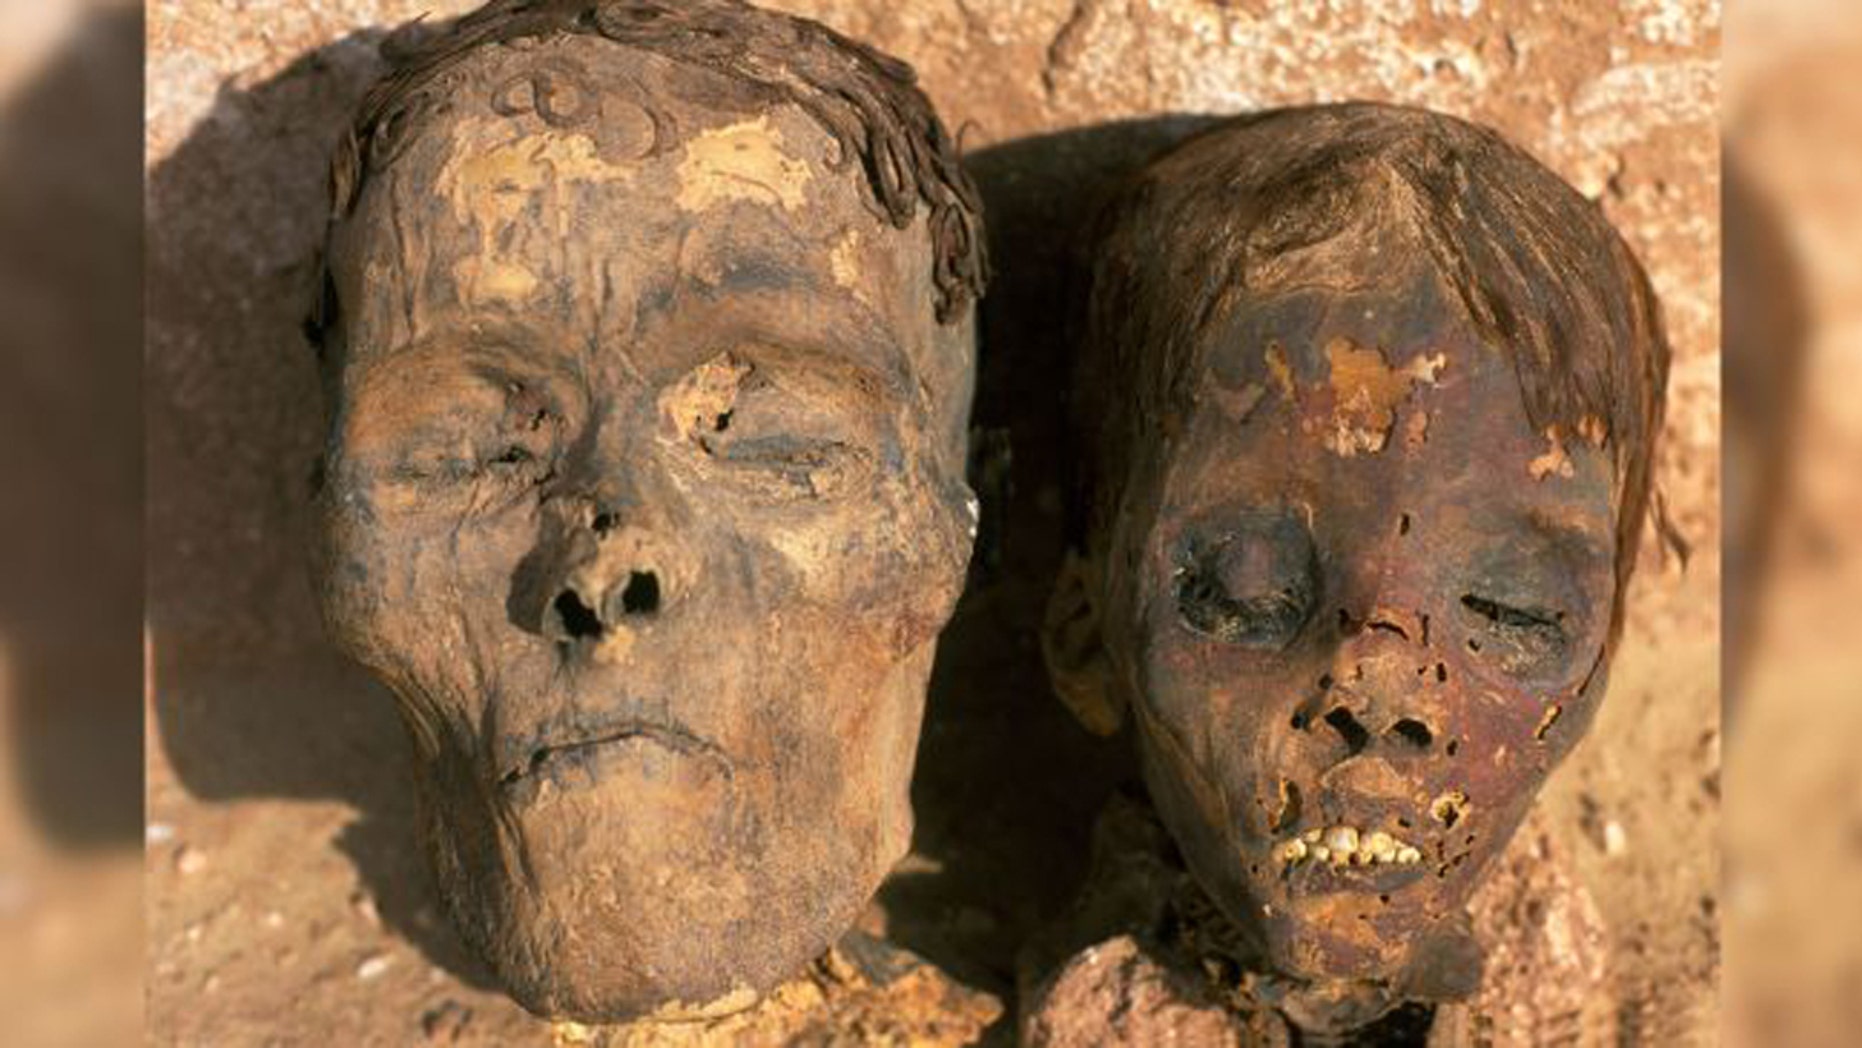 One of the mummies that provided arterial samples came from Dakhla Oasis in Egypt, as did the mummies pictured here. (Credit: Alamy)